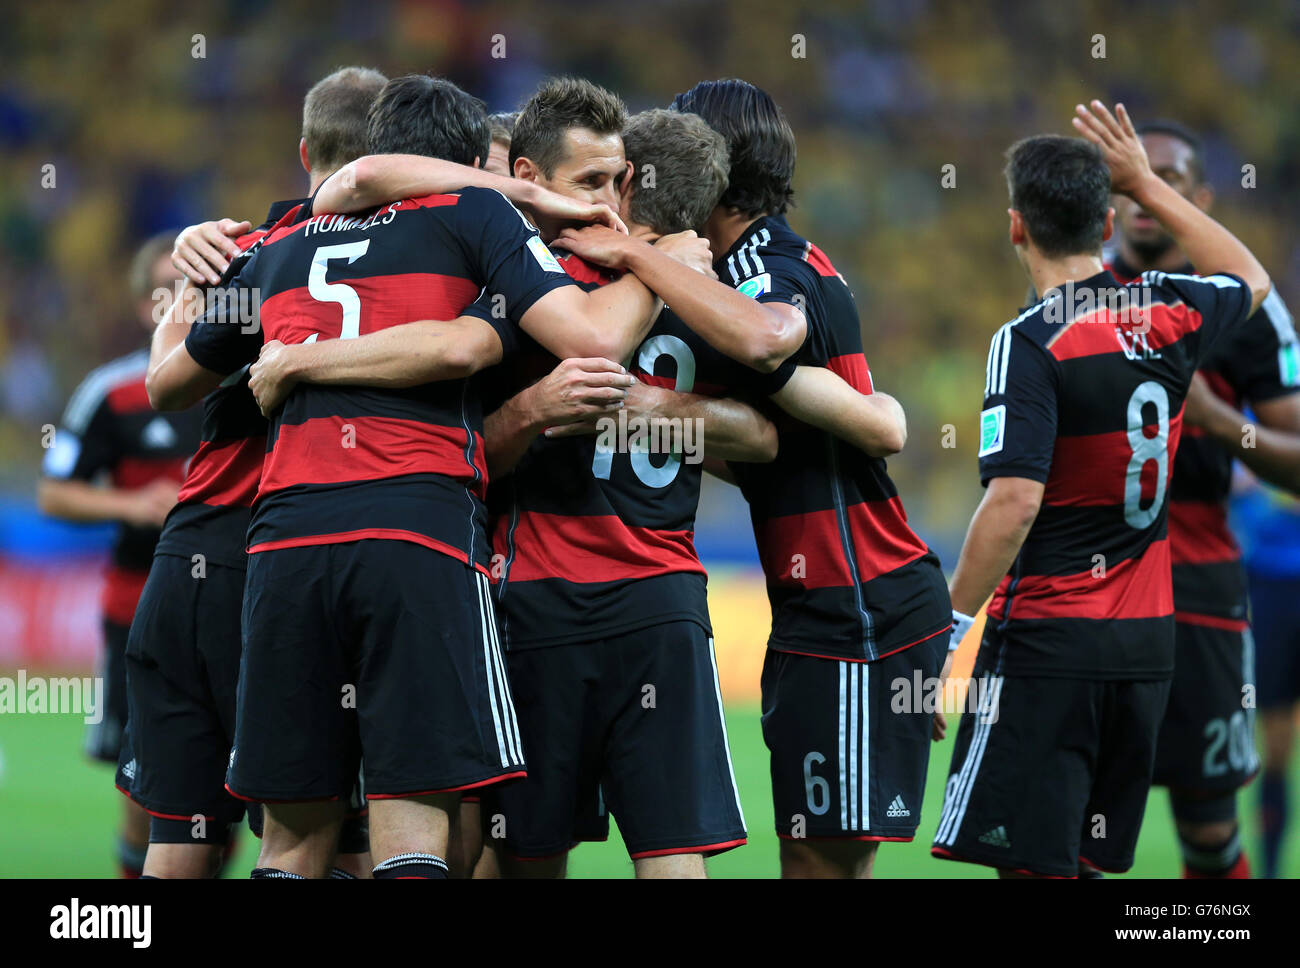 Germany's Miroslav Klose (left) celebrates scoring his side's second goal of the game with teammates during the FIFA World Cup Semi Final at Estadio Mineirao, Belo Horizonte, Brazil. Stock Photo